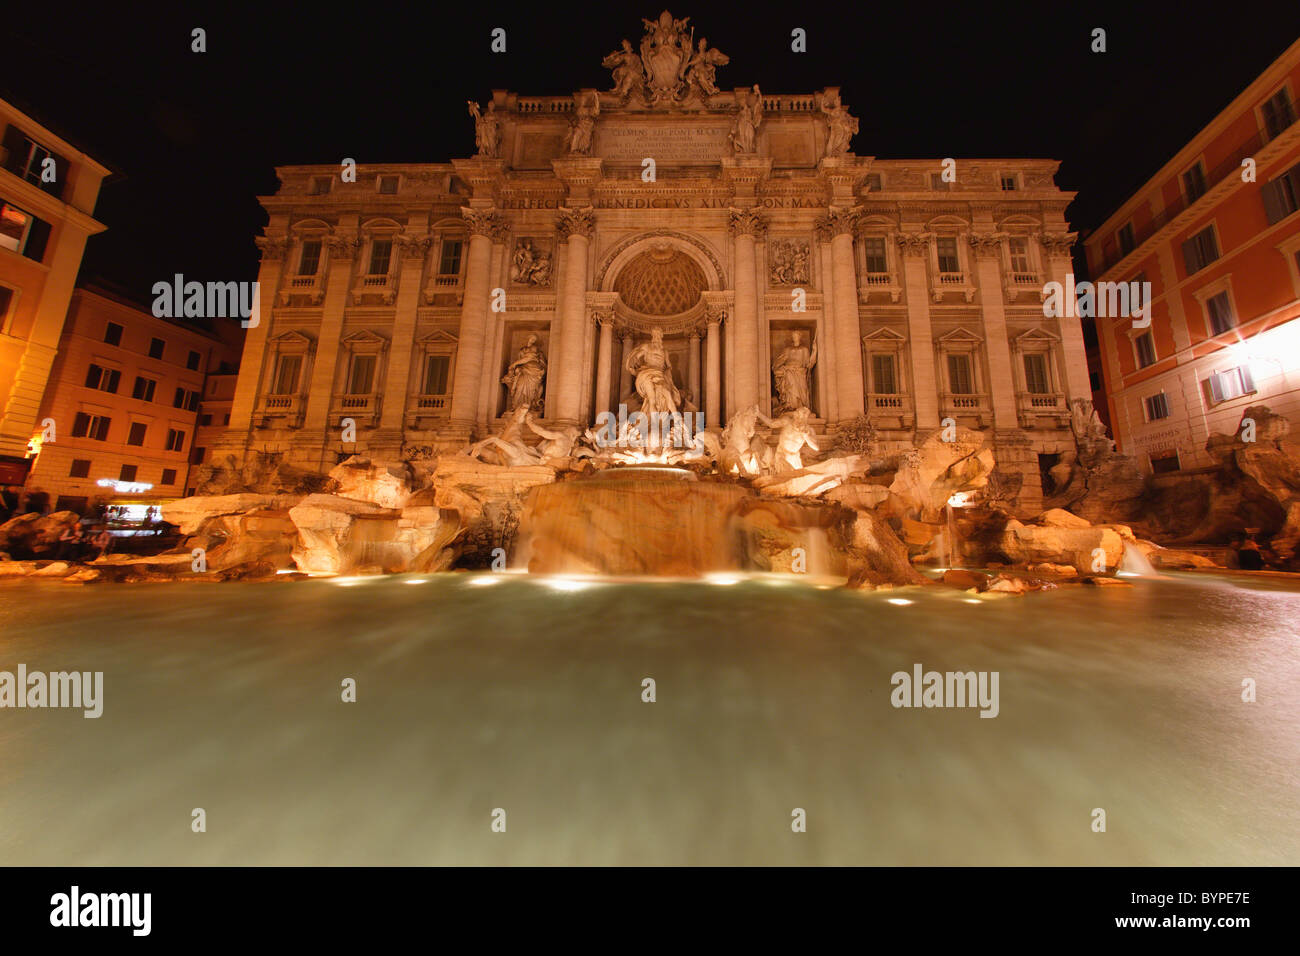 Low Angle View of the Trevi Fountain at Night, Rome, Italy Stock Photo